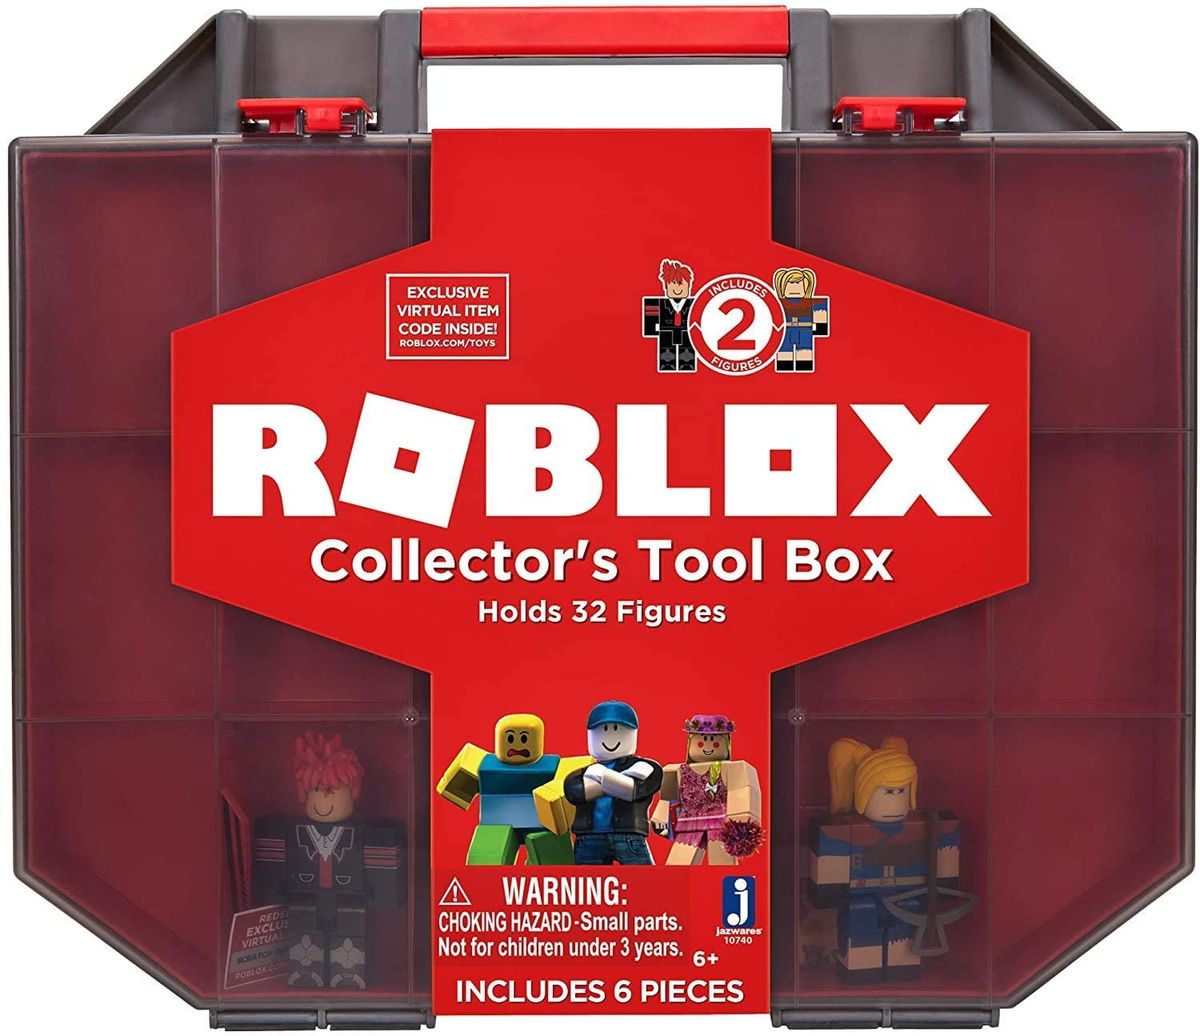 Best Prime Day Toy Deals 2020 The Best Lego And Stem Sets Marvel And Funko Figures And More Techradar - up to 55 off roblox figures at amazon today only